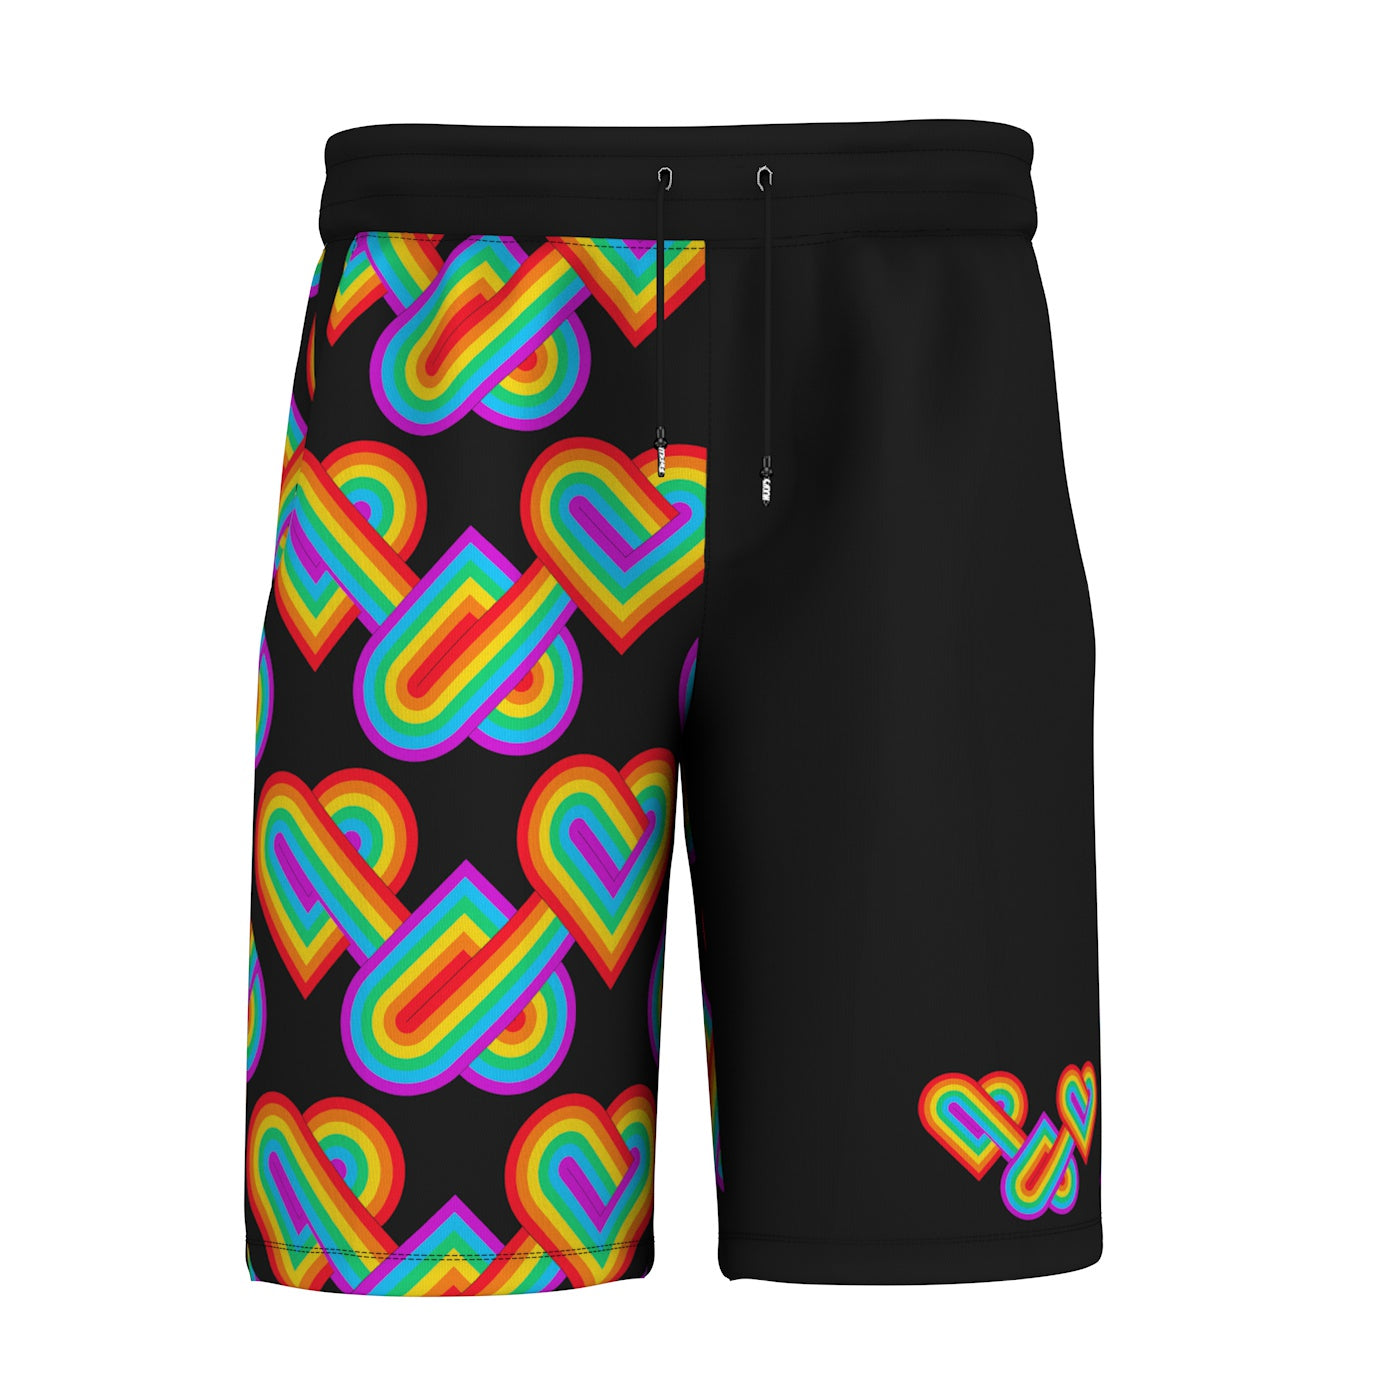 Connected Hearts Shorts